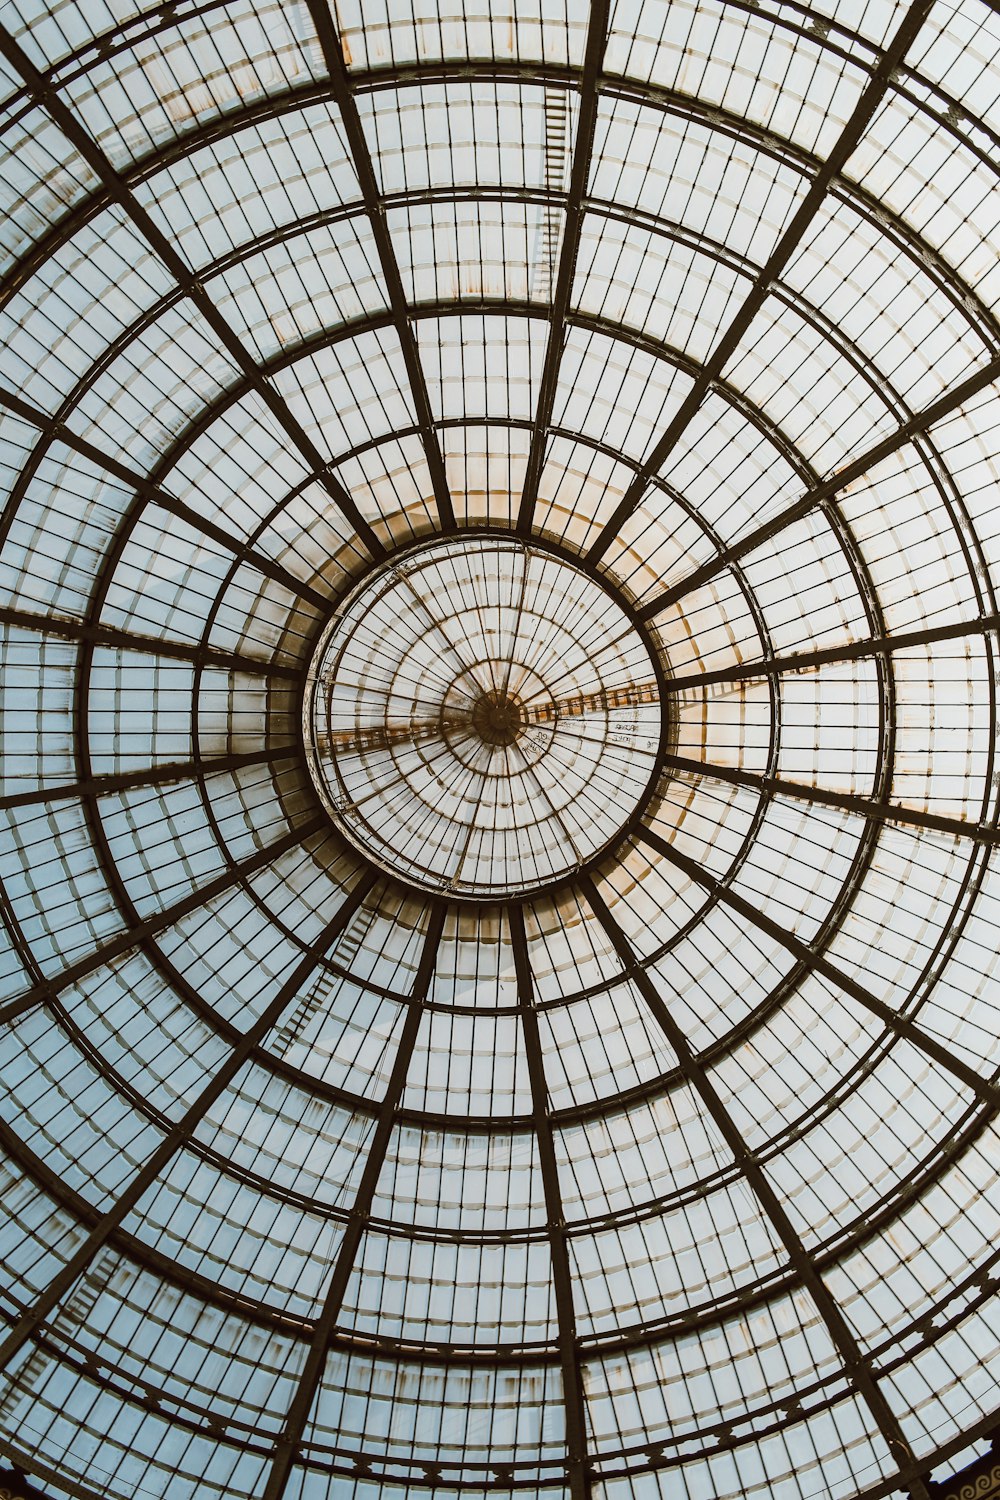 a view of a glass ceiling in a building